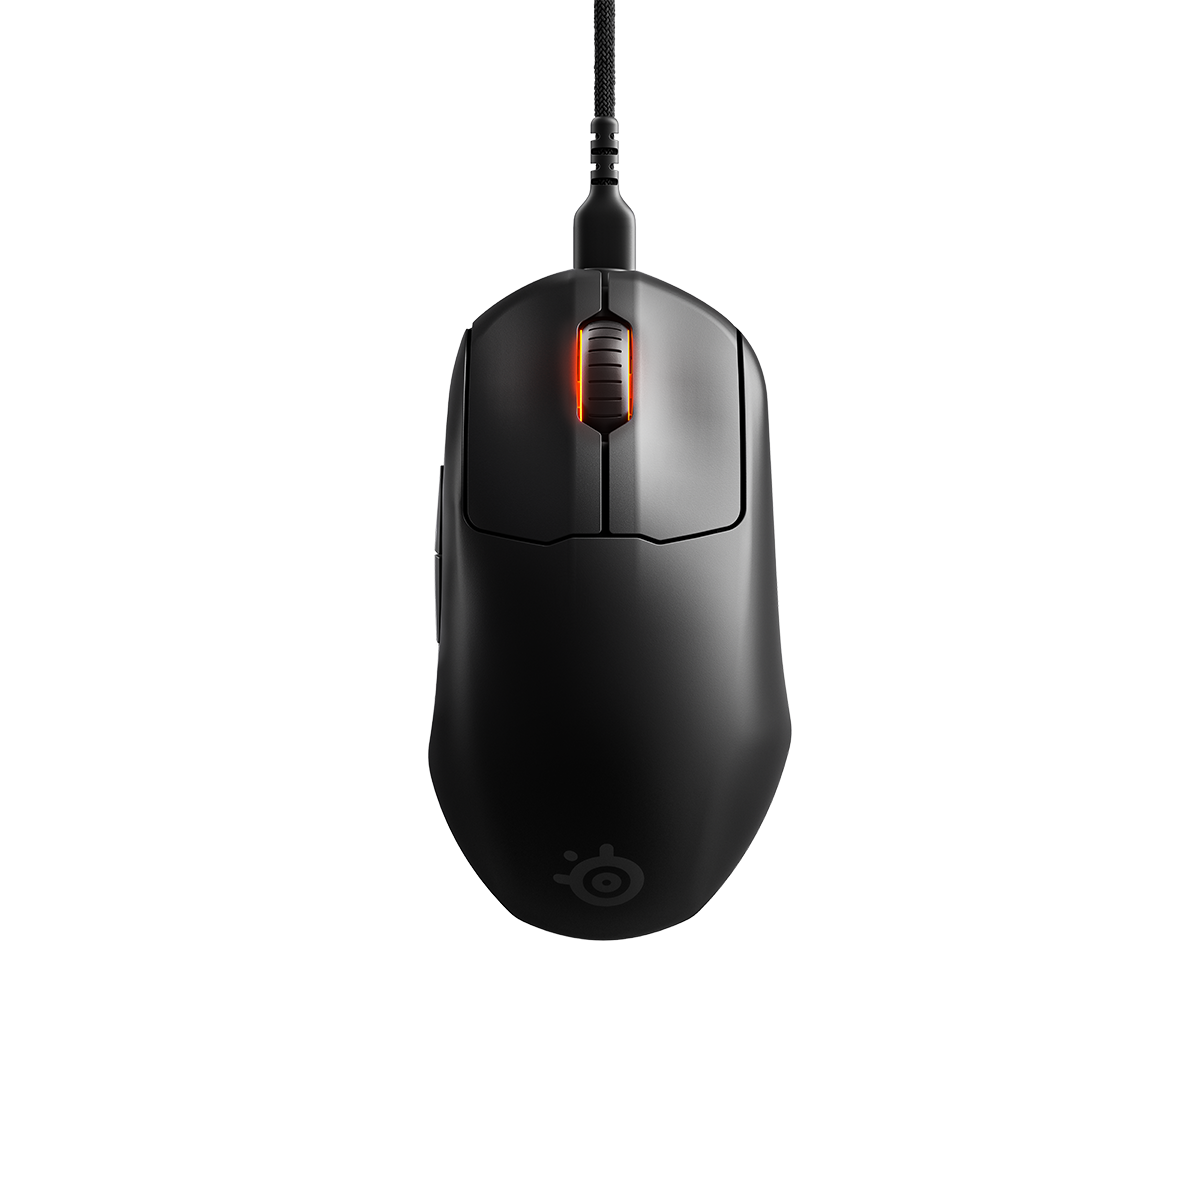 SteelSeries PRIME MINI Wired Precision Esports Mouse in a Small, Light Form Factor